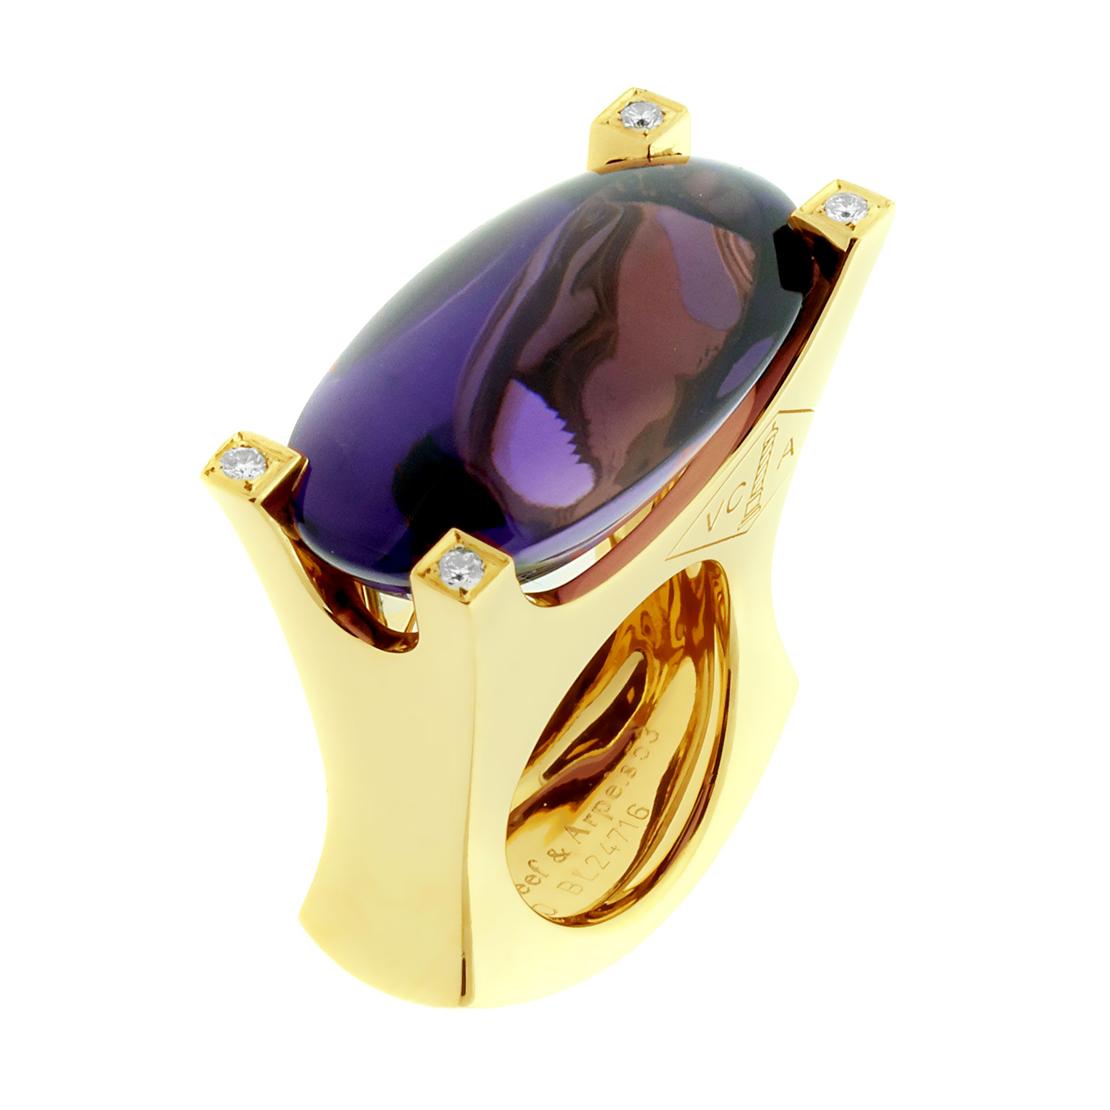 A fabulous Van Cleef and Arpels cocktail ring featuring a vivid amethyst encased by 4 of the finest Van Cleef and Arpels round brilliant cut diamonds in 18k yellow gold.

Weight : 45.8 grams
